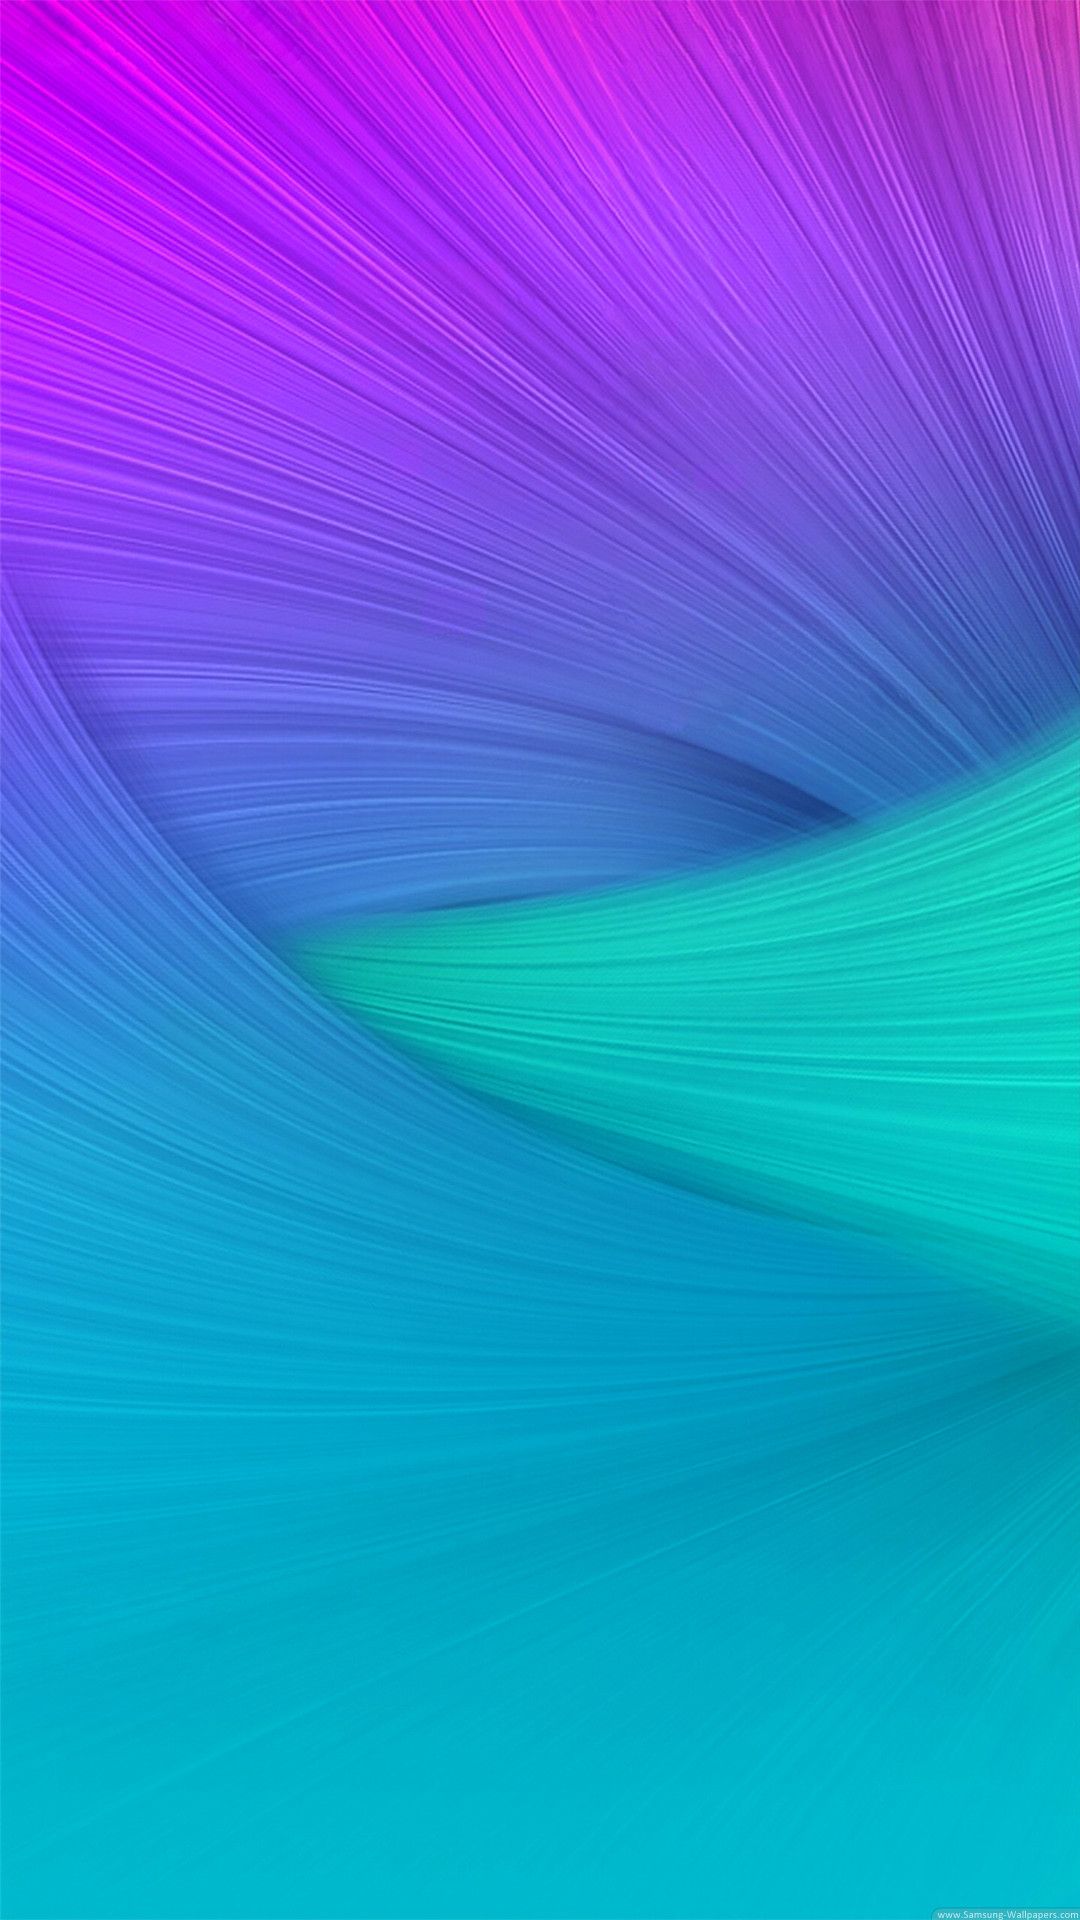 Galaxy Note 4 Wallpaper Free Galaxy Note 4 Background